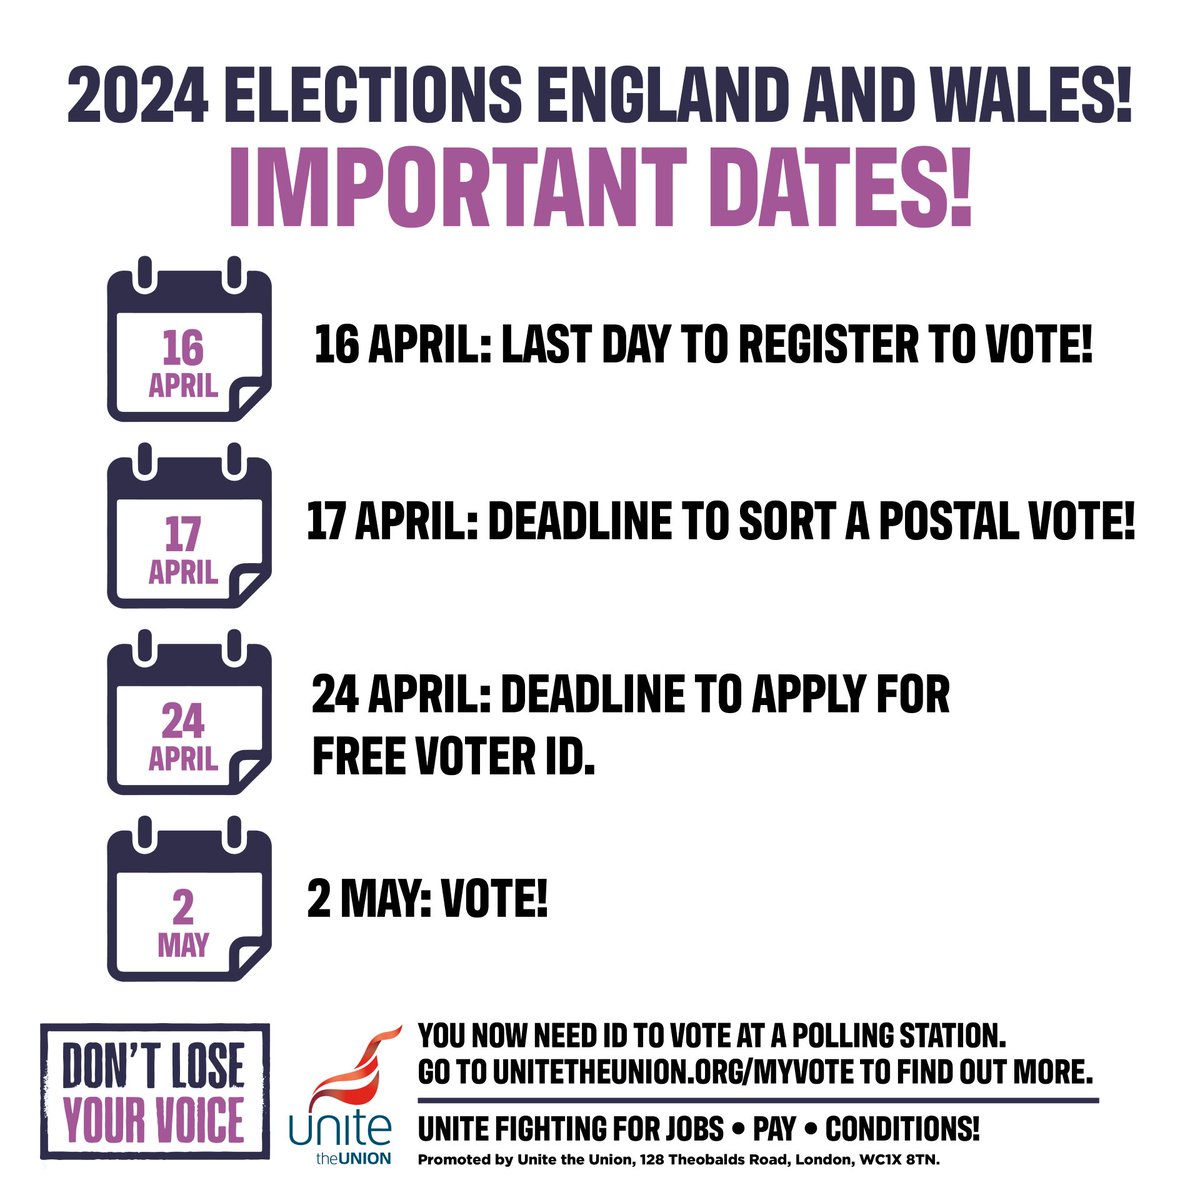 🗳️Have you registered to vote yet? The deadline to register for the 2nd May elections in England and Wales is 16 April. ❗Remember to bring photo ID!! You need ID to vote at a polling station. #DontLoseYourVoice Find out more at unitetheunion.org/myvote #UKelections2024